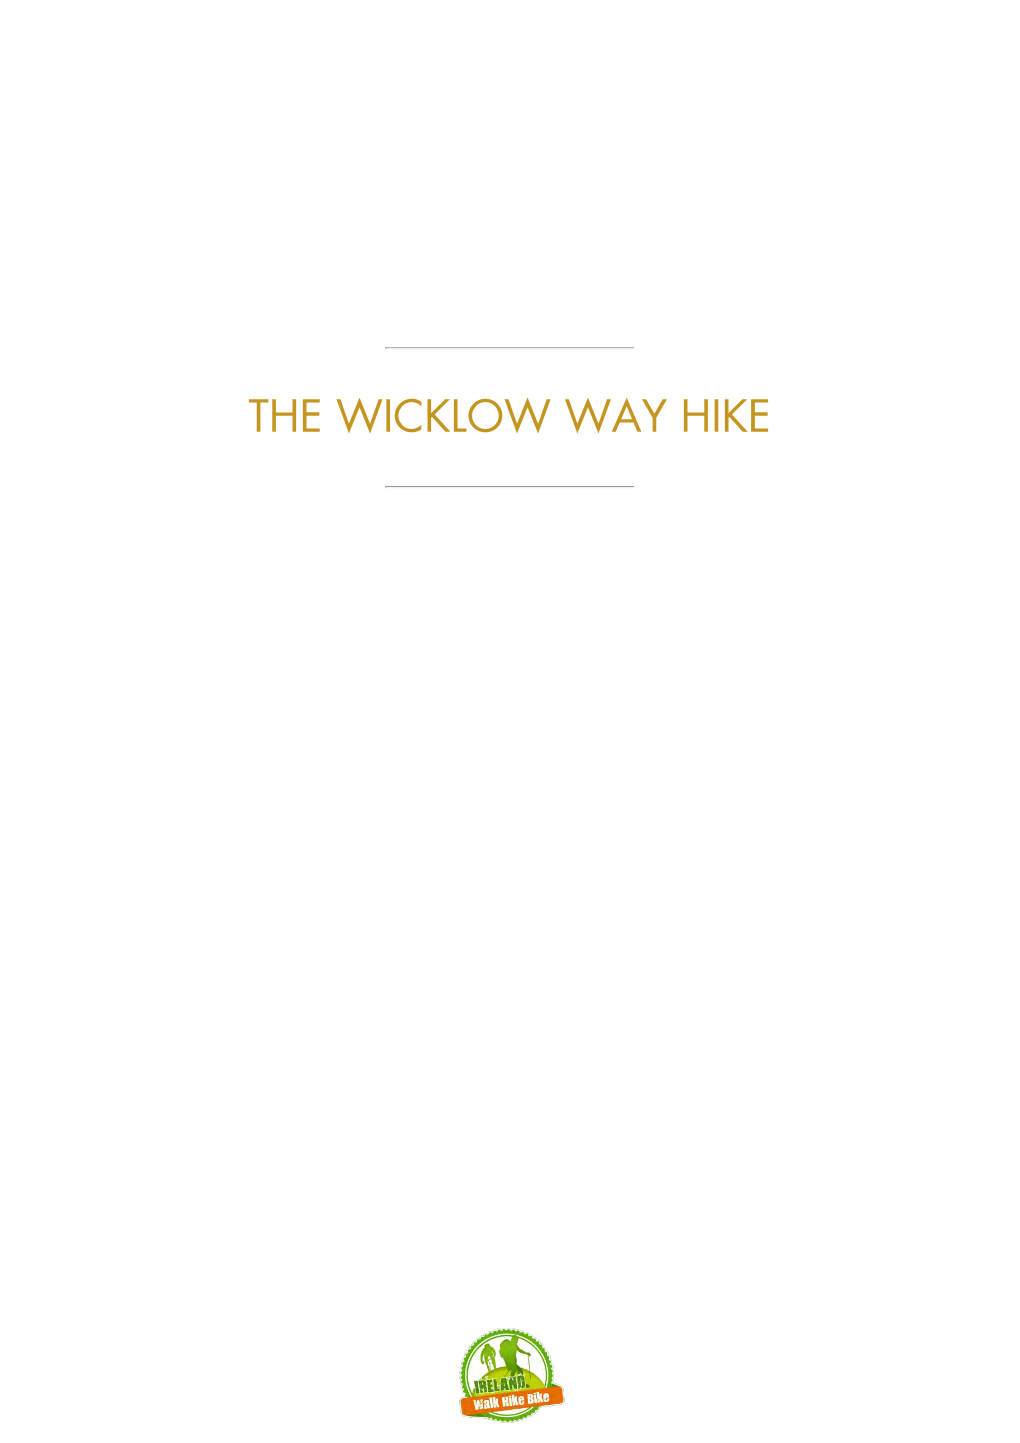 The Wicklow Way Hike Itinerary at a Glance